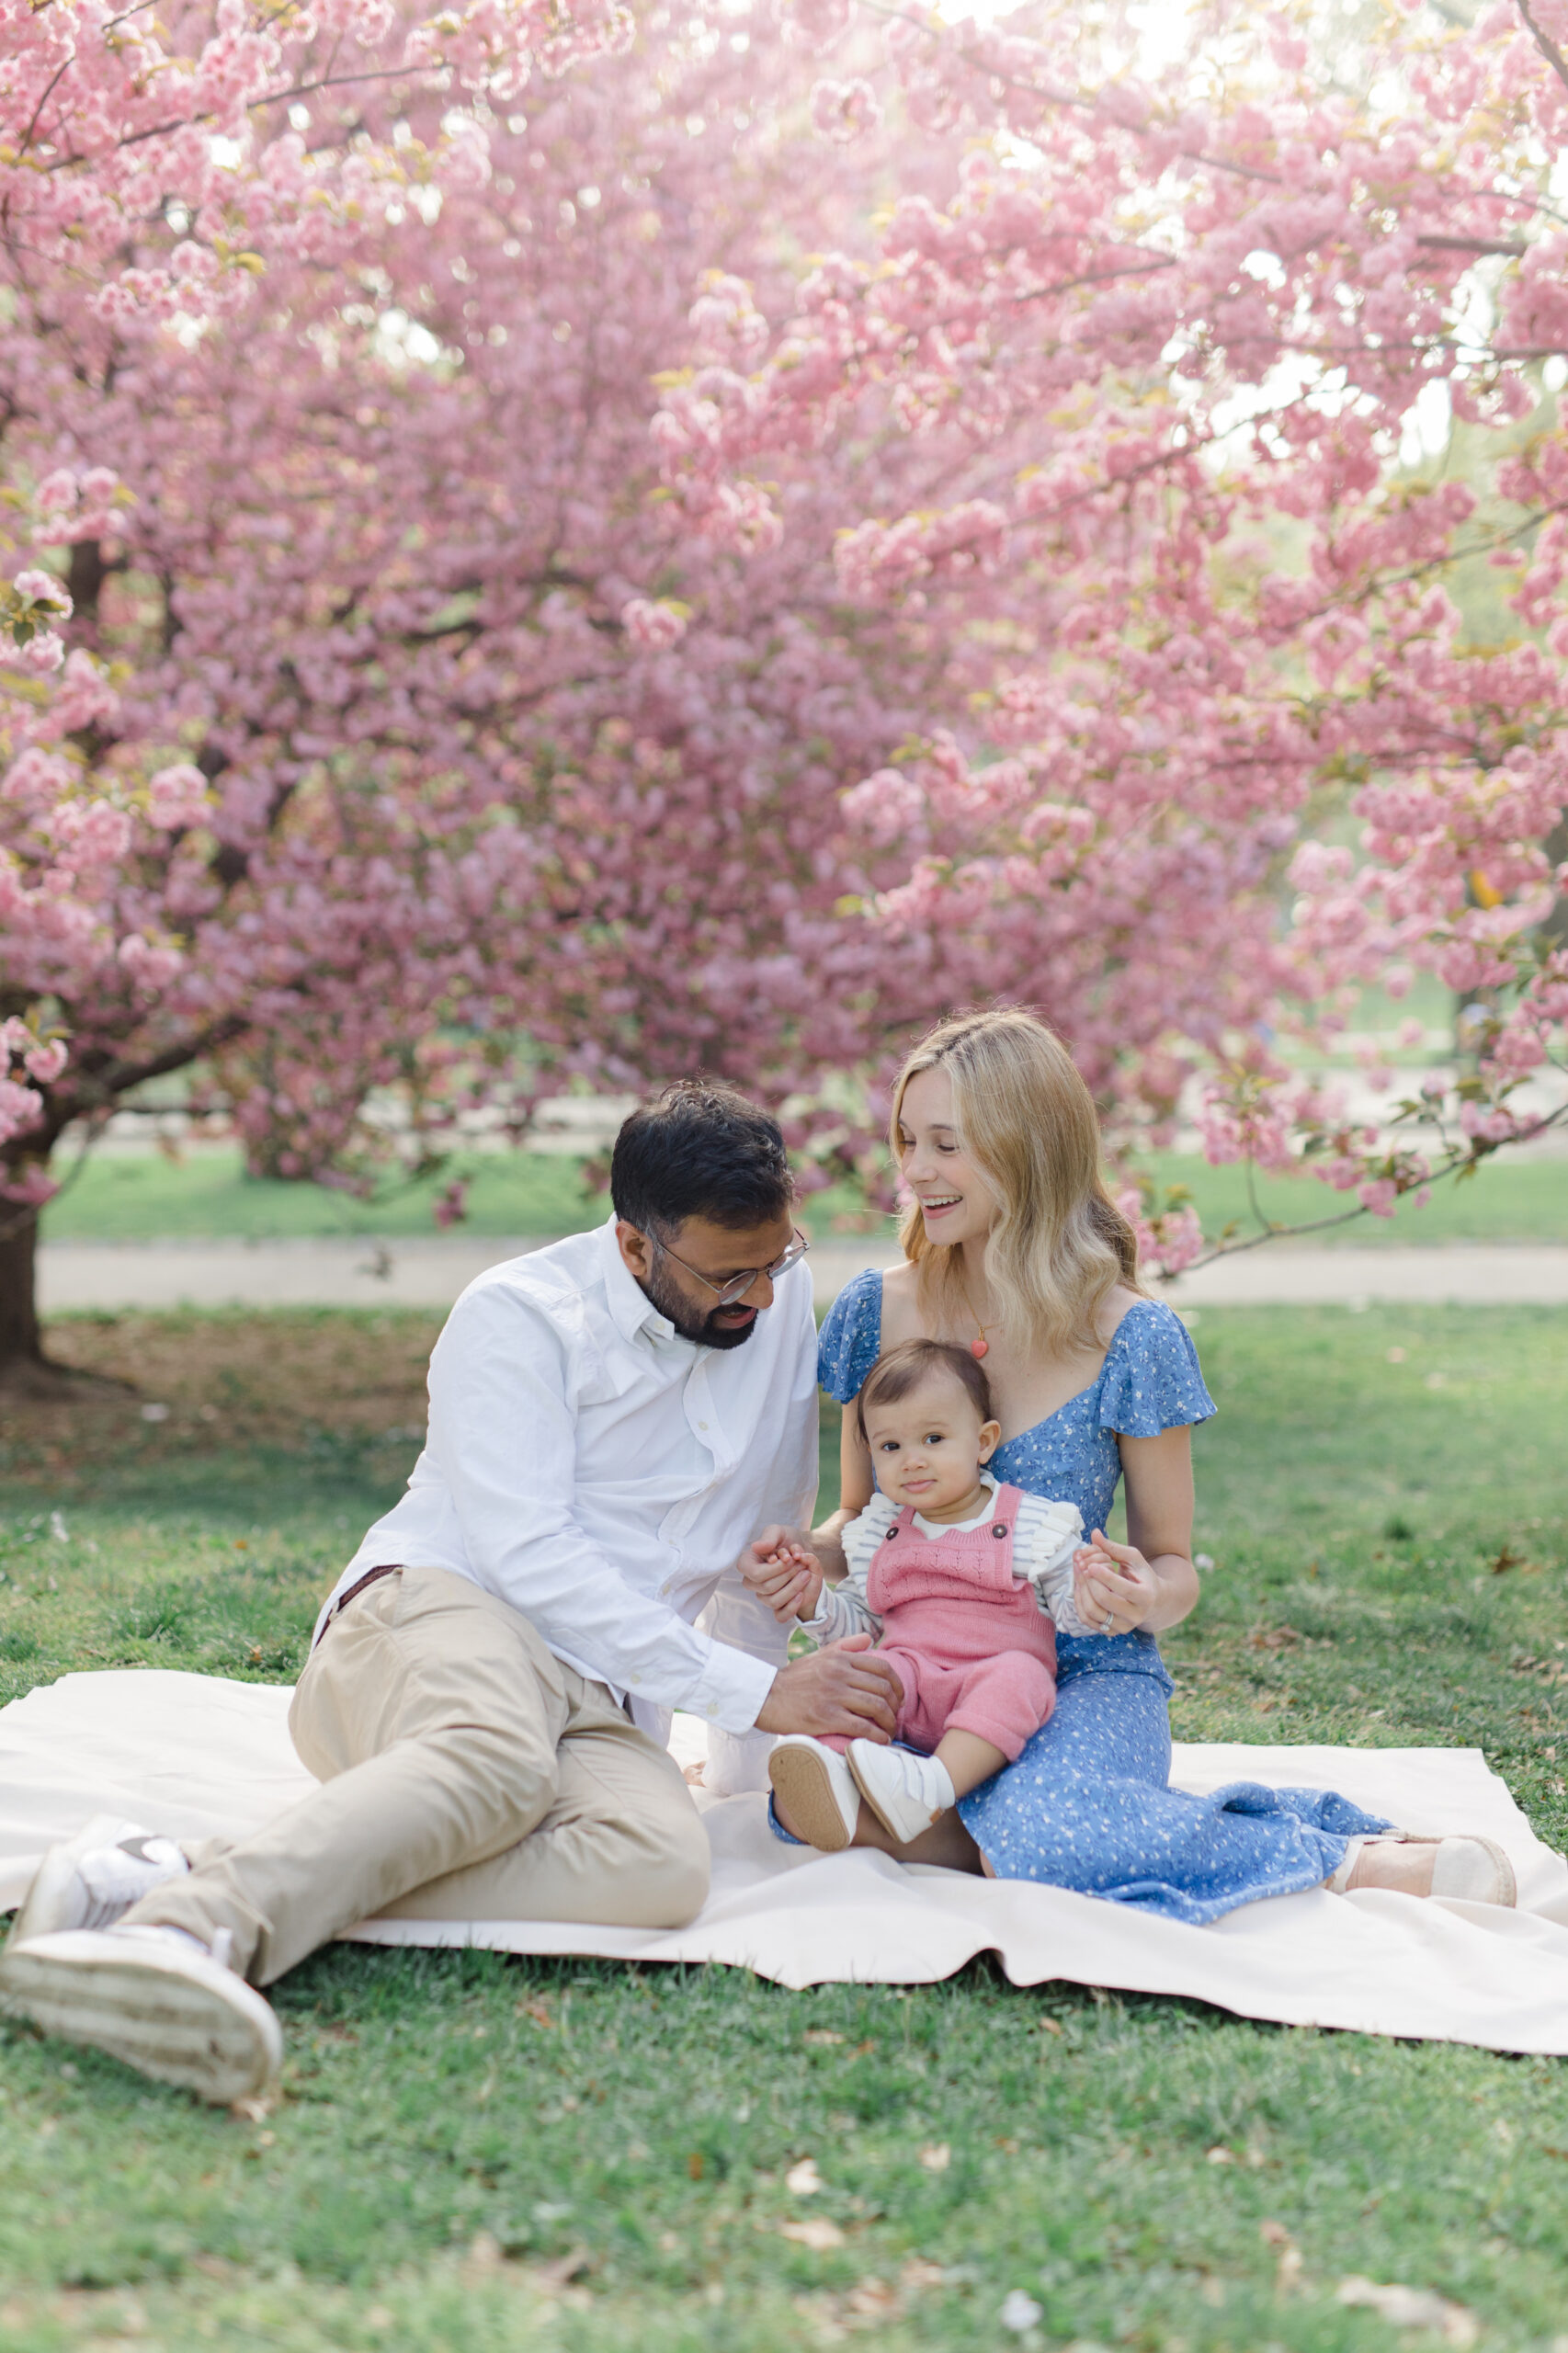 A spring mini session in Central Park with the cherry blossoms, shot by Jacqueline Clair Photography